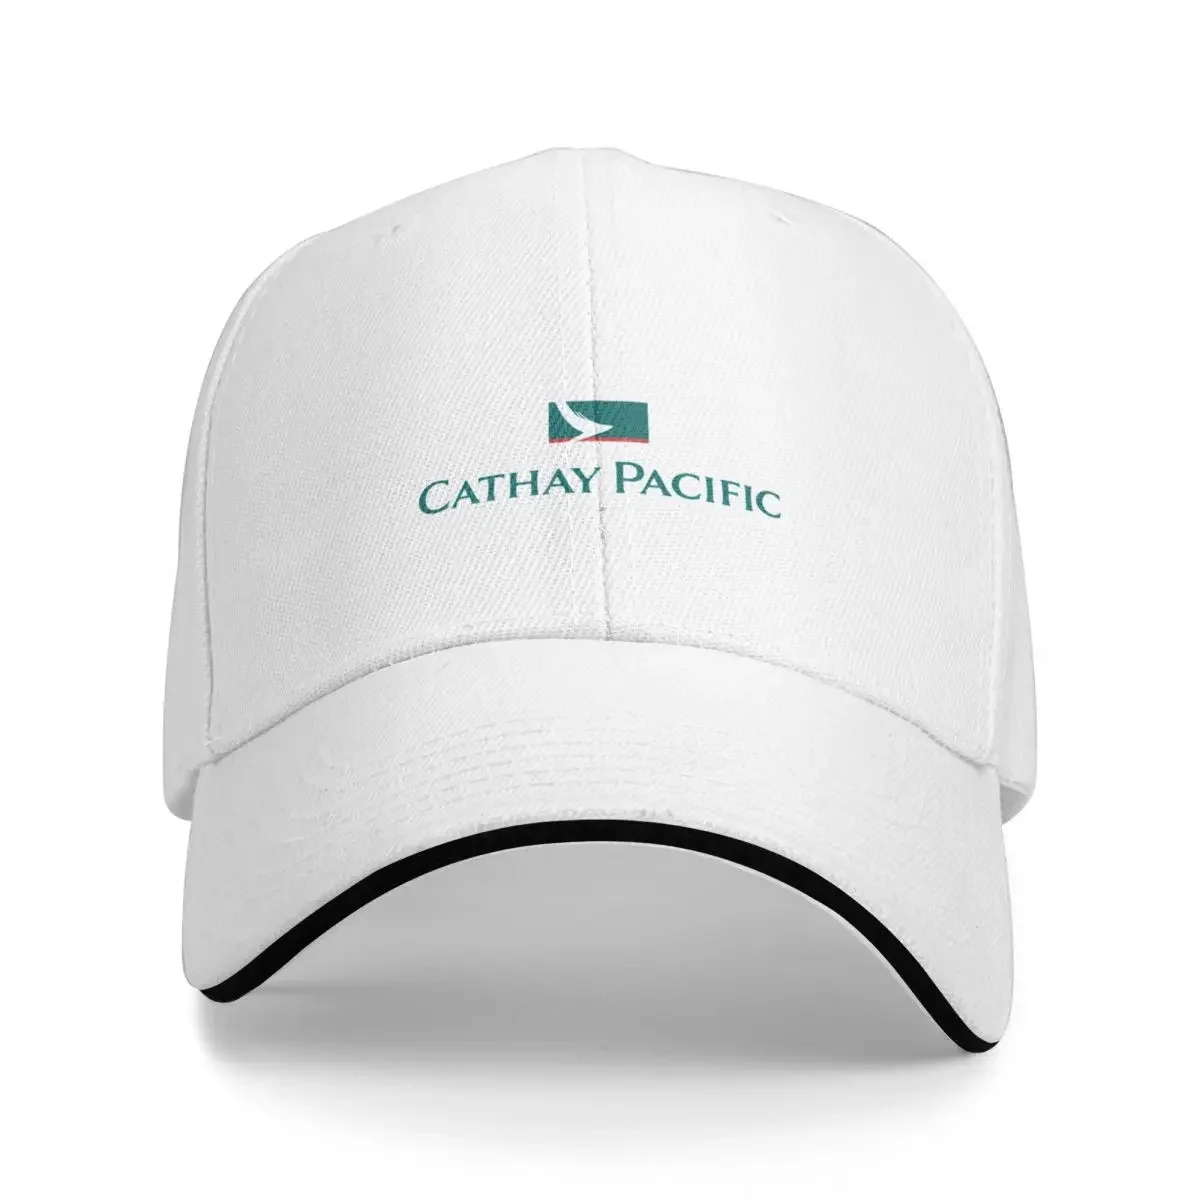 

Awesome Cathay Pacific Design Cap Baseball Cap military tactical caps new in hat trucker hats for men Women's